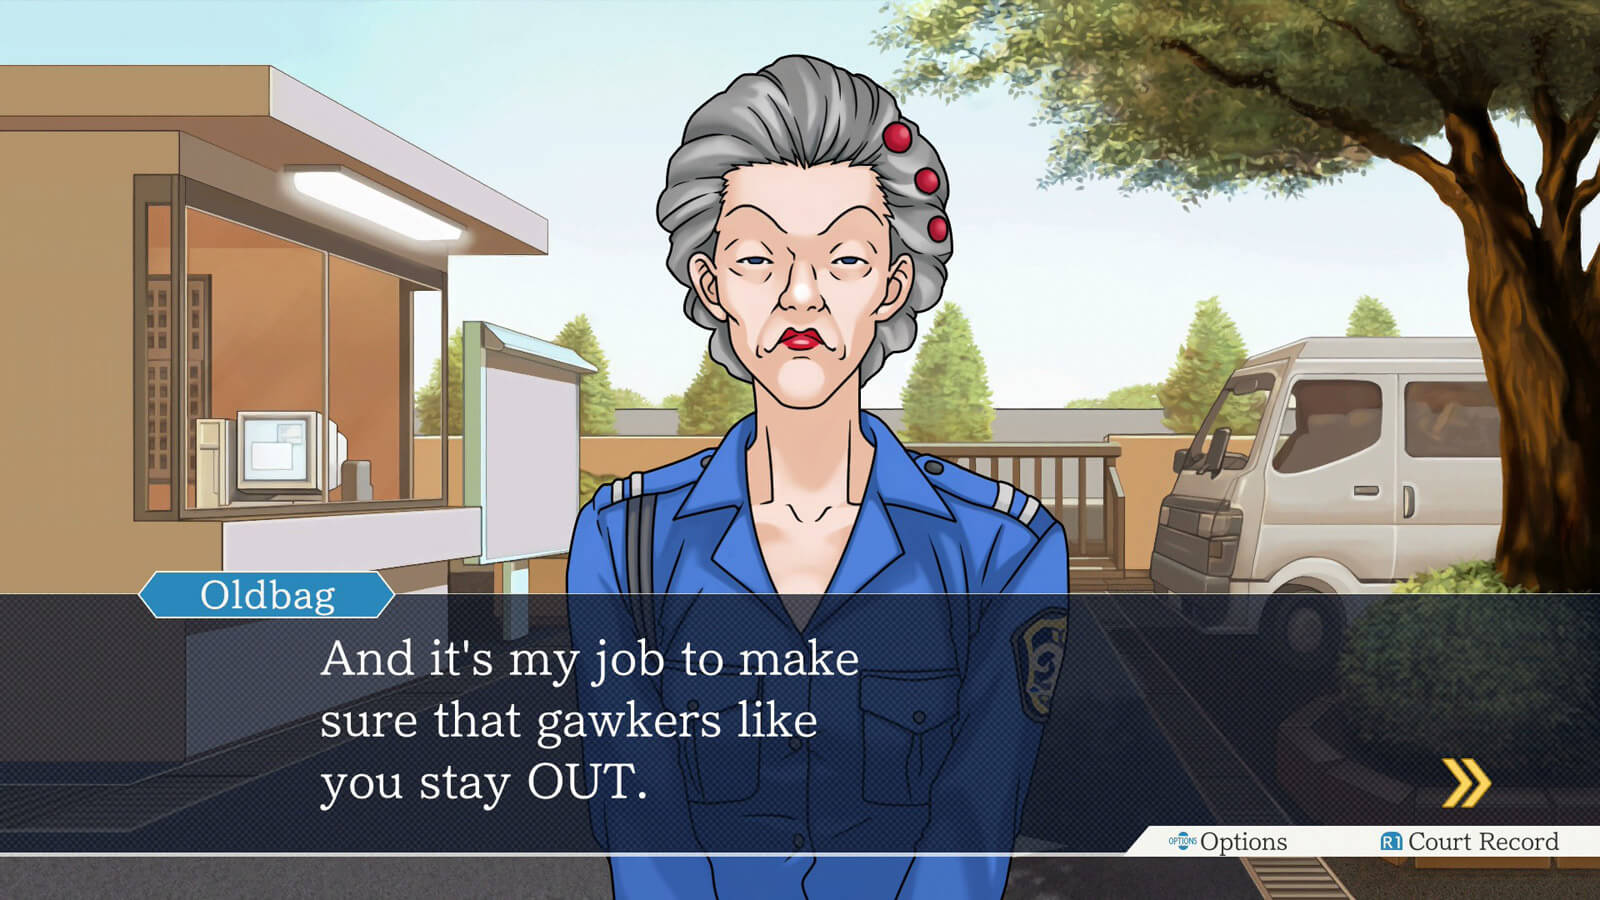 Phoenix Wright: Ace Attorney Trilogy Out Now